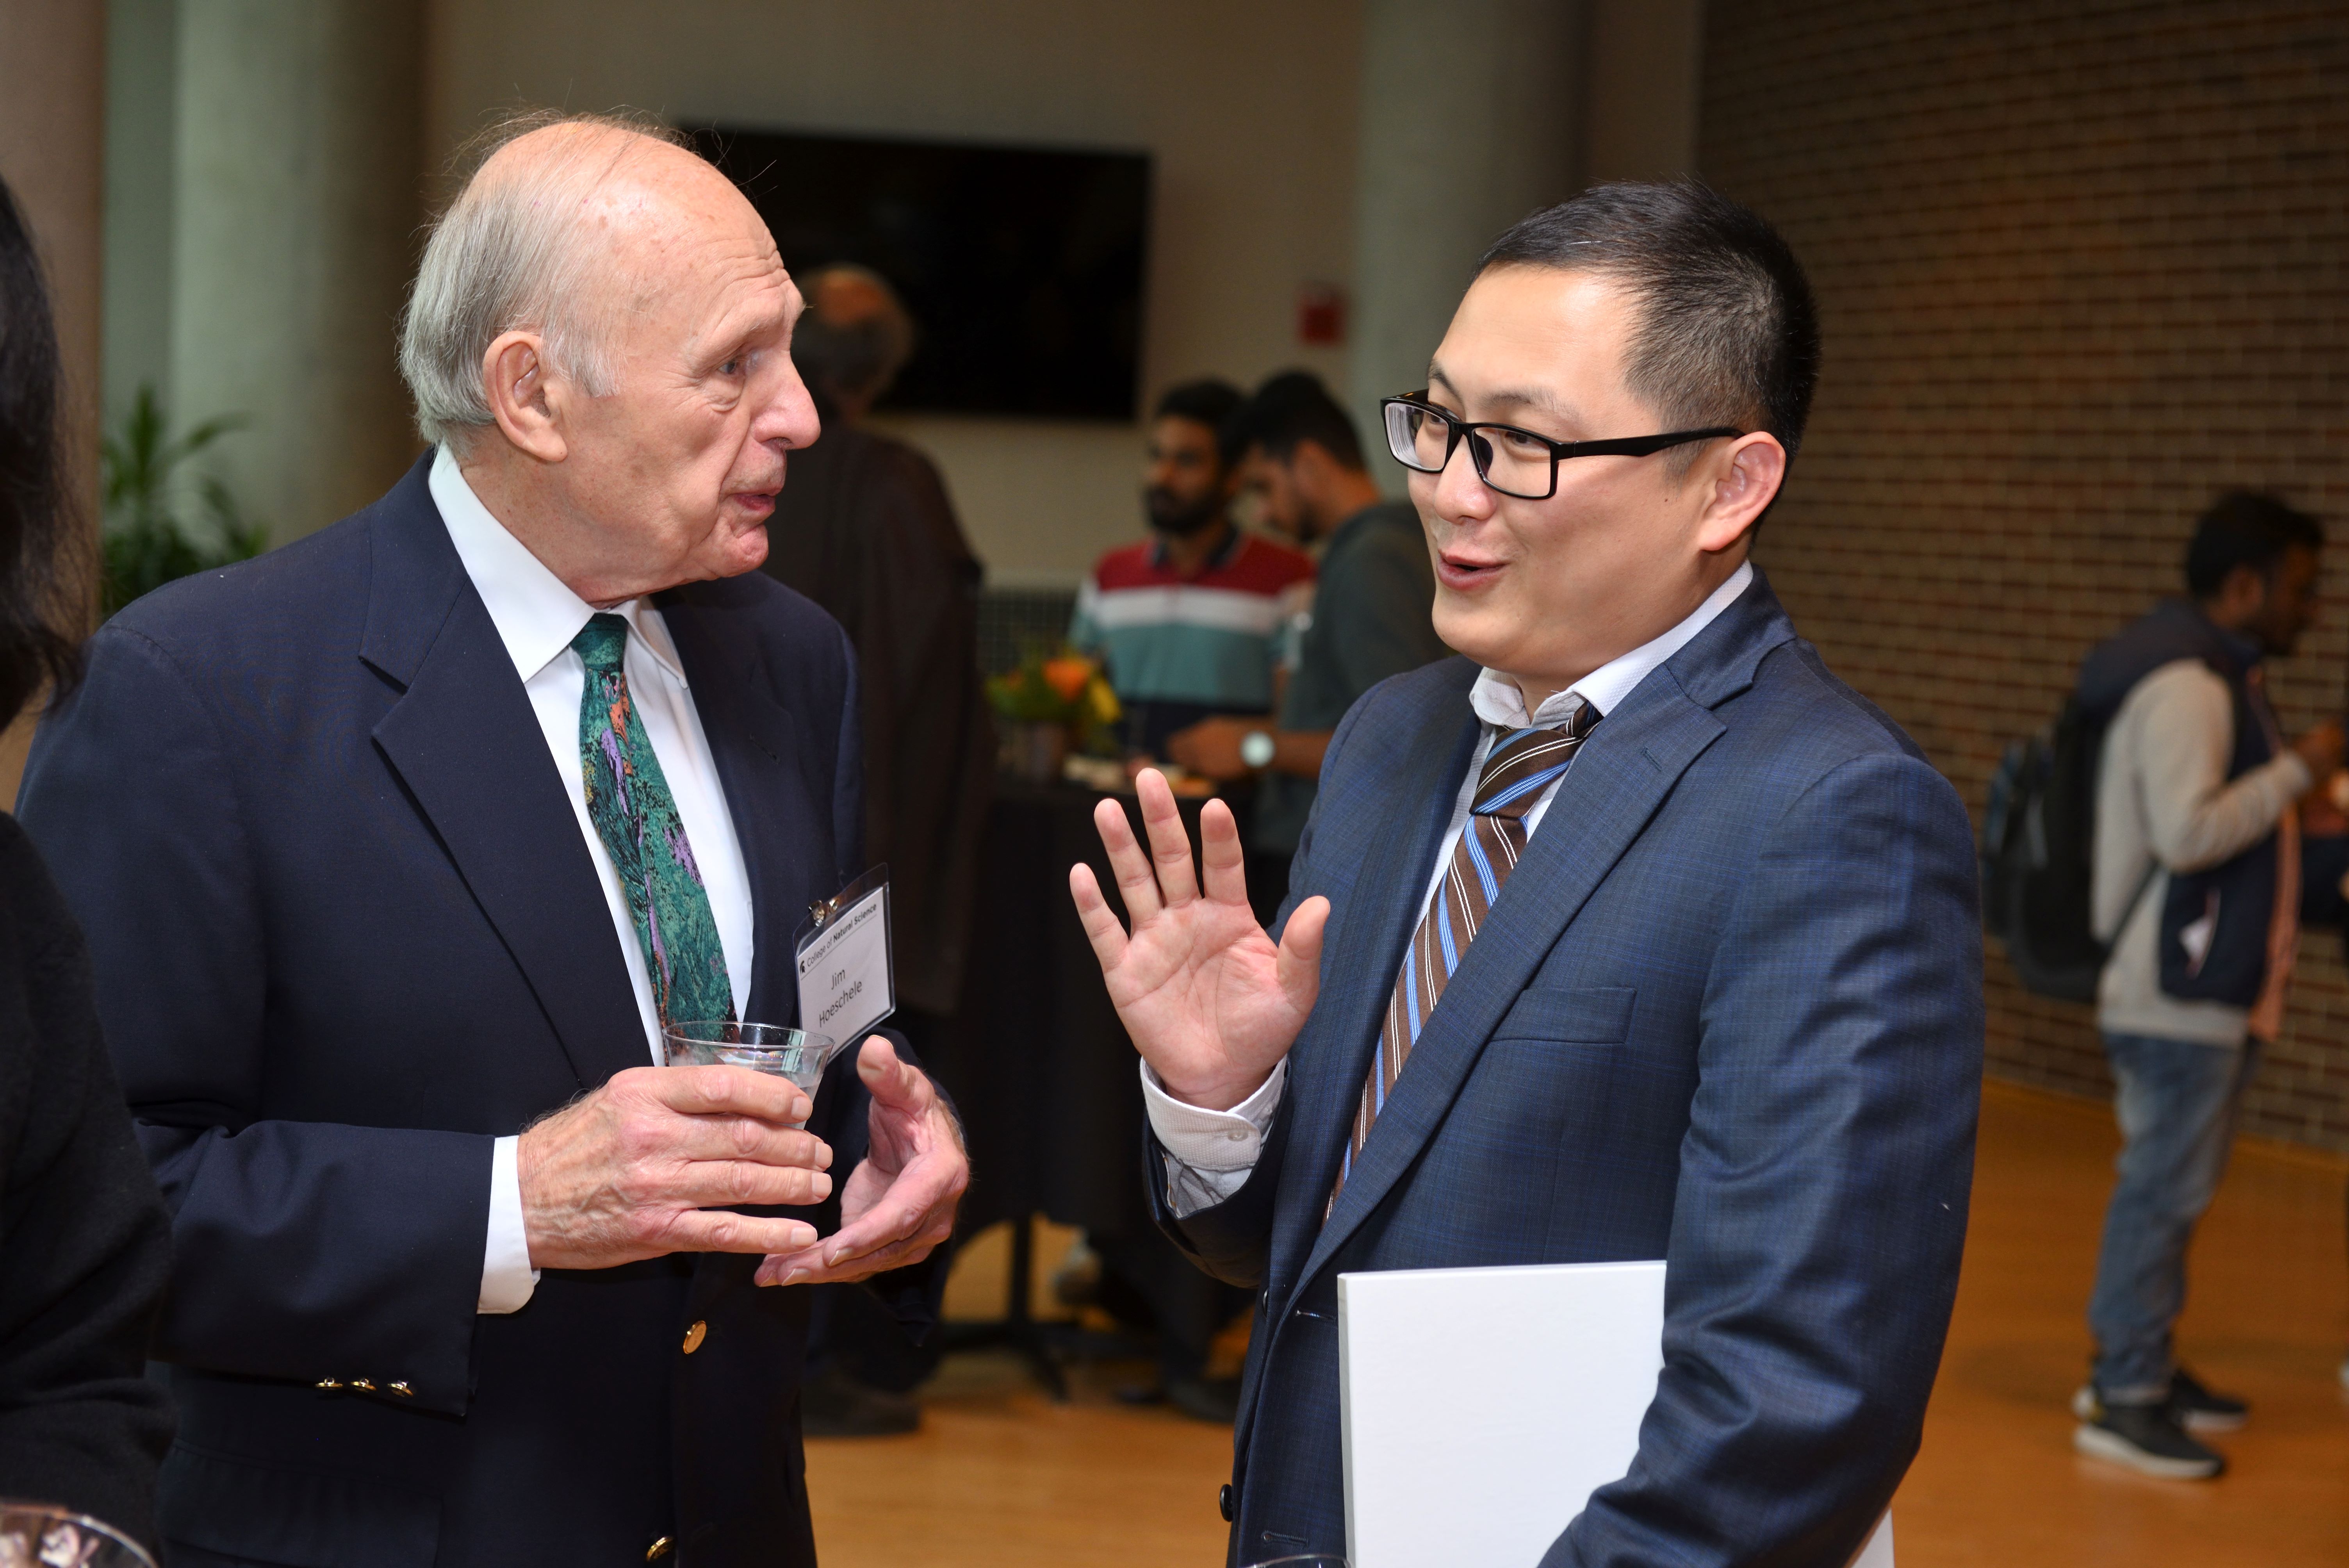 Tuo Wang, associate professor of chemistry and the inaugural Carl H. Brubaker, Jr. Endowed Professor, talks with Jim Hoeschele, who established the Brubaker professorship, at a reception following his investiture ceremony. Photo Credit: Harley Seeley.